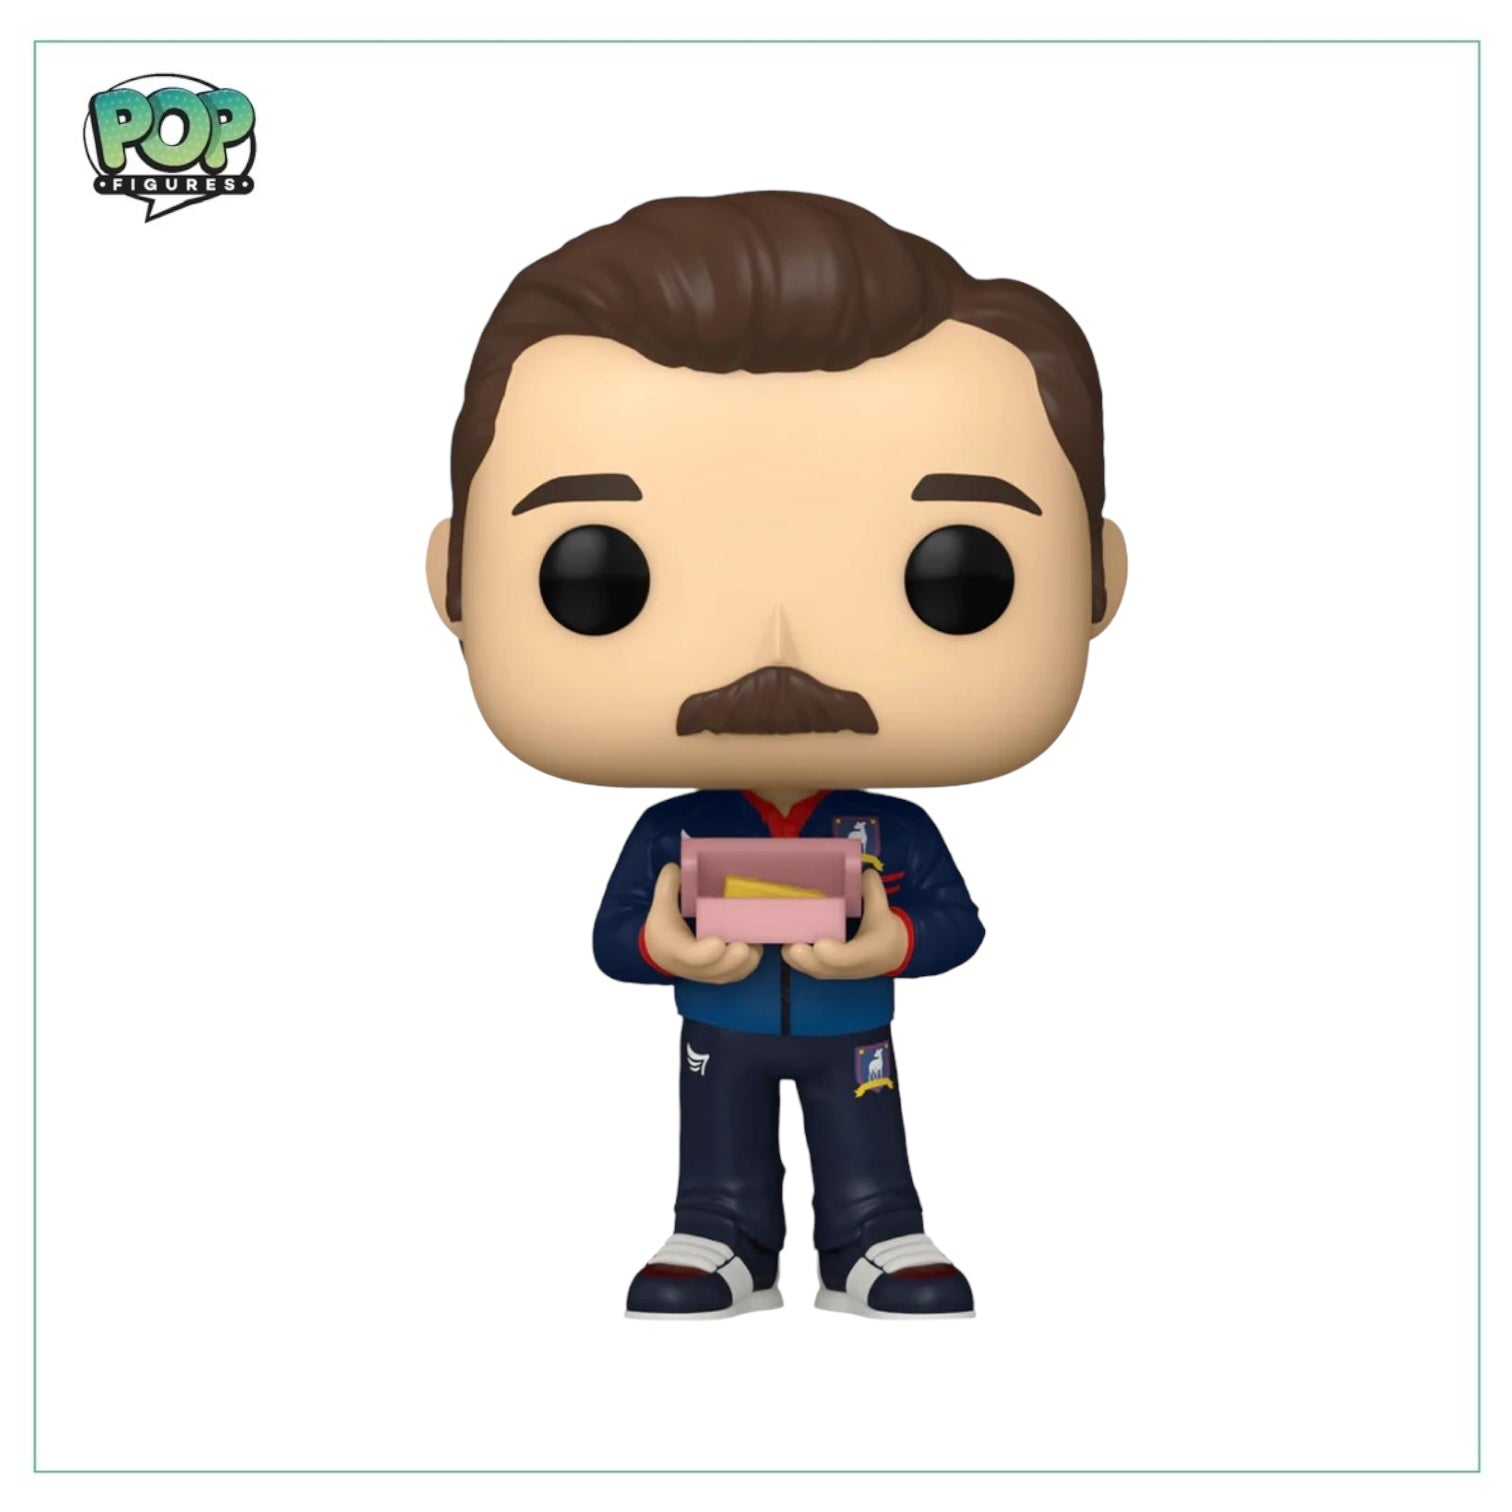 Ted Lasso with Biscuits #1506 Funko Pop! - Ted Lasso